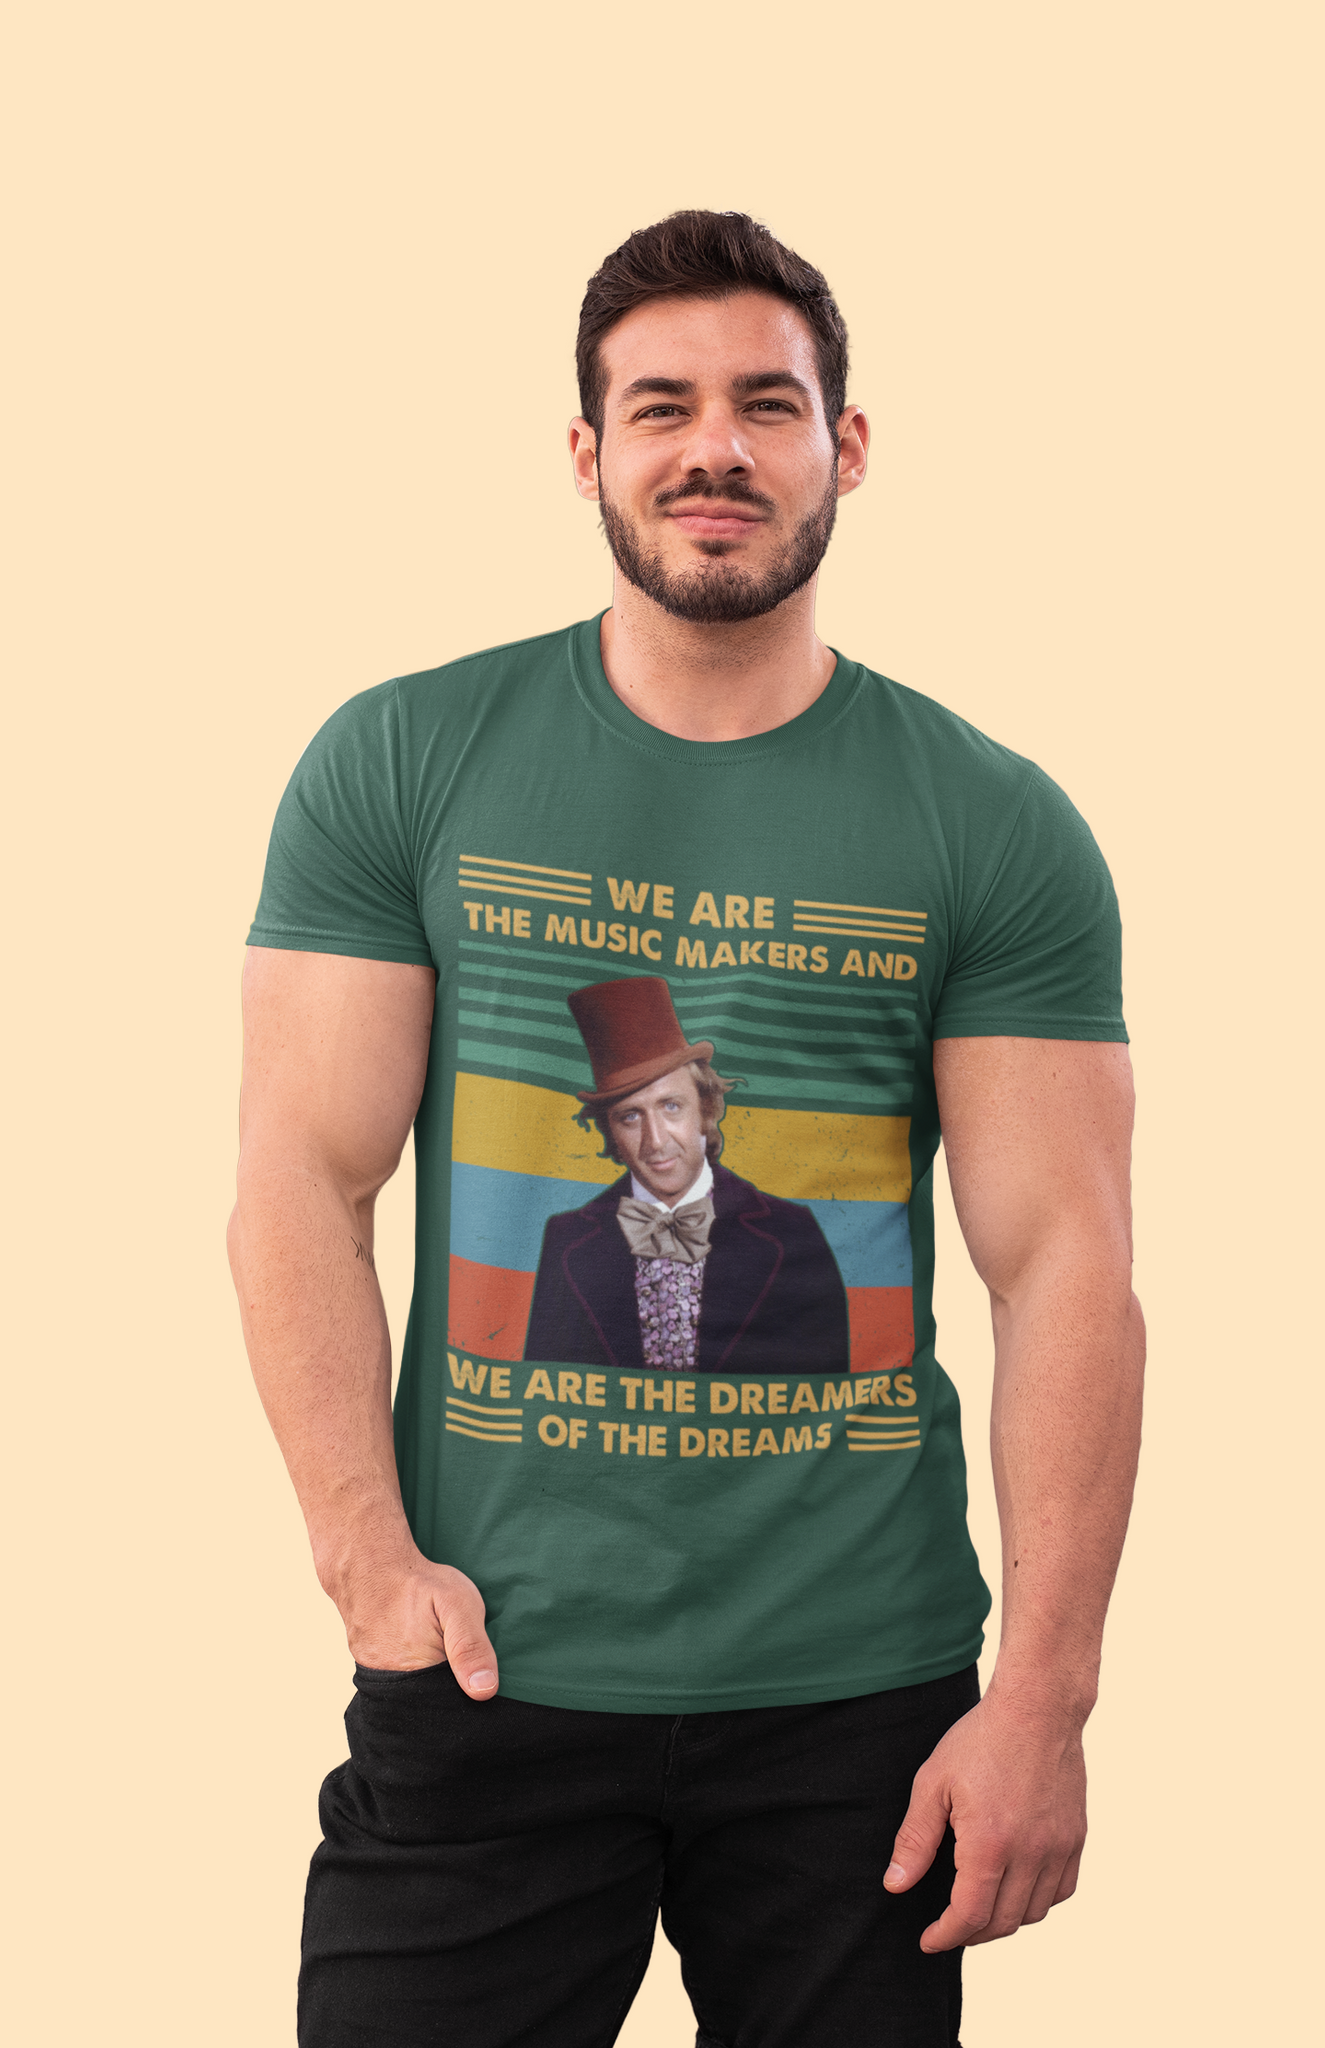 Charlie And The Chocolate Factory Vintage T Shirt, Willy Wonka T Shirt, We Are The Music Makers Tshirt